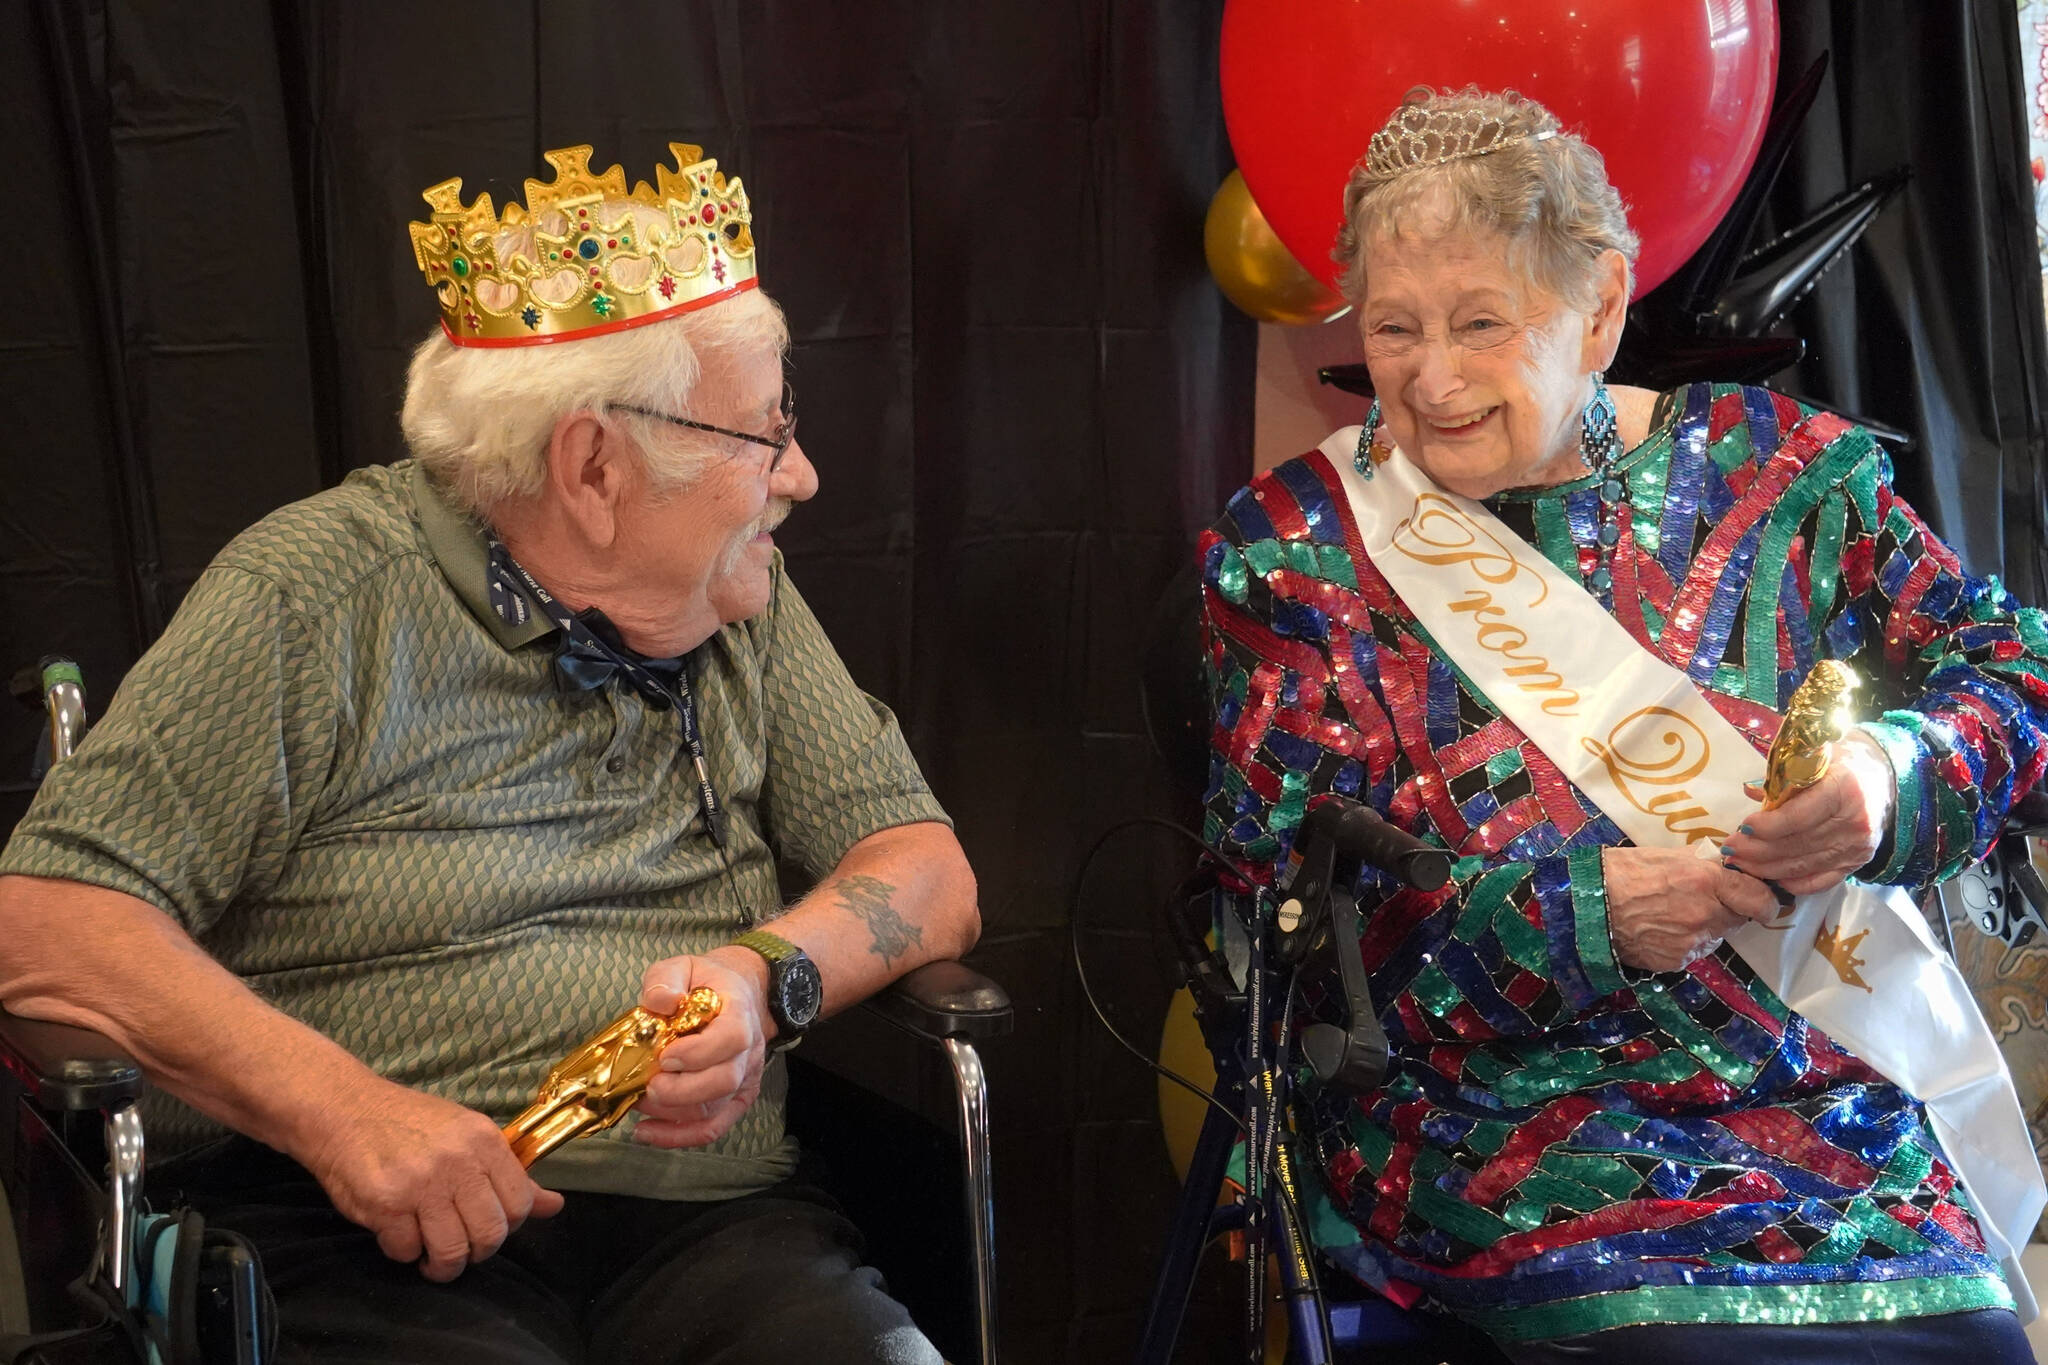 Senior Prom King and Queen Dennis Borbon and Lorraine Ashcraft are crowned at the 2023 High Roller Senior Prom at Aspen Creek Senior Living in Kenai, Alaska, on Friday, Sept. 22, 2023. (Jake Dye/Peninsula Clarion)